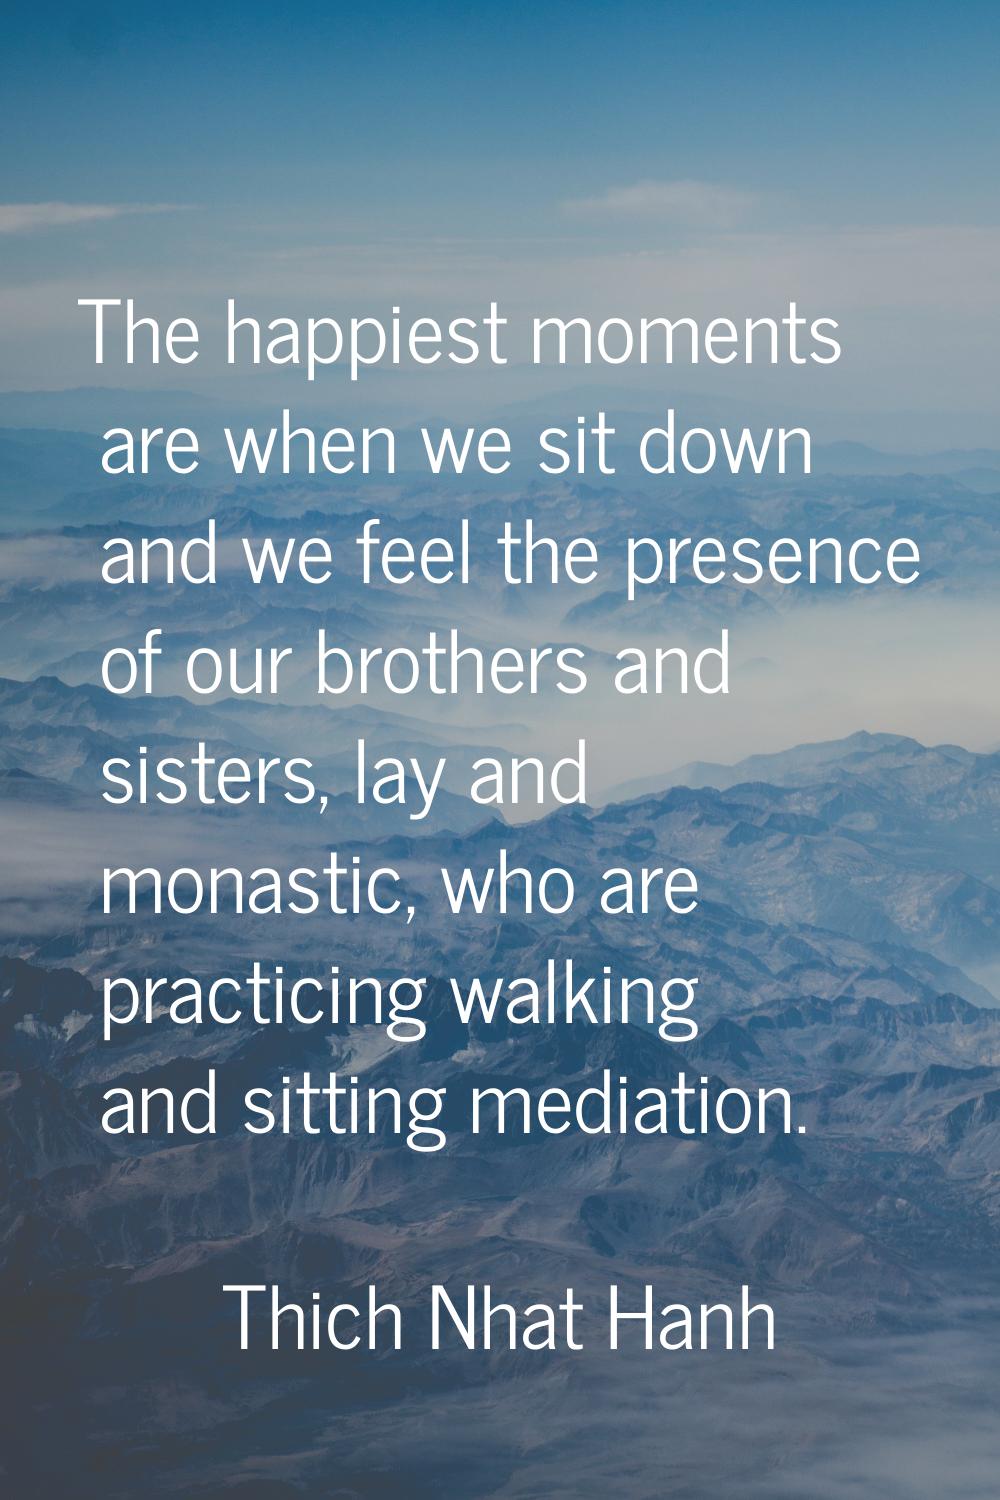 The happiest moments are when we sit down and we feel the presence of our brothers and sisters, lay